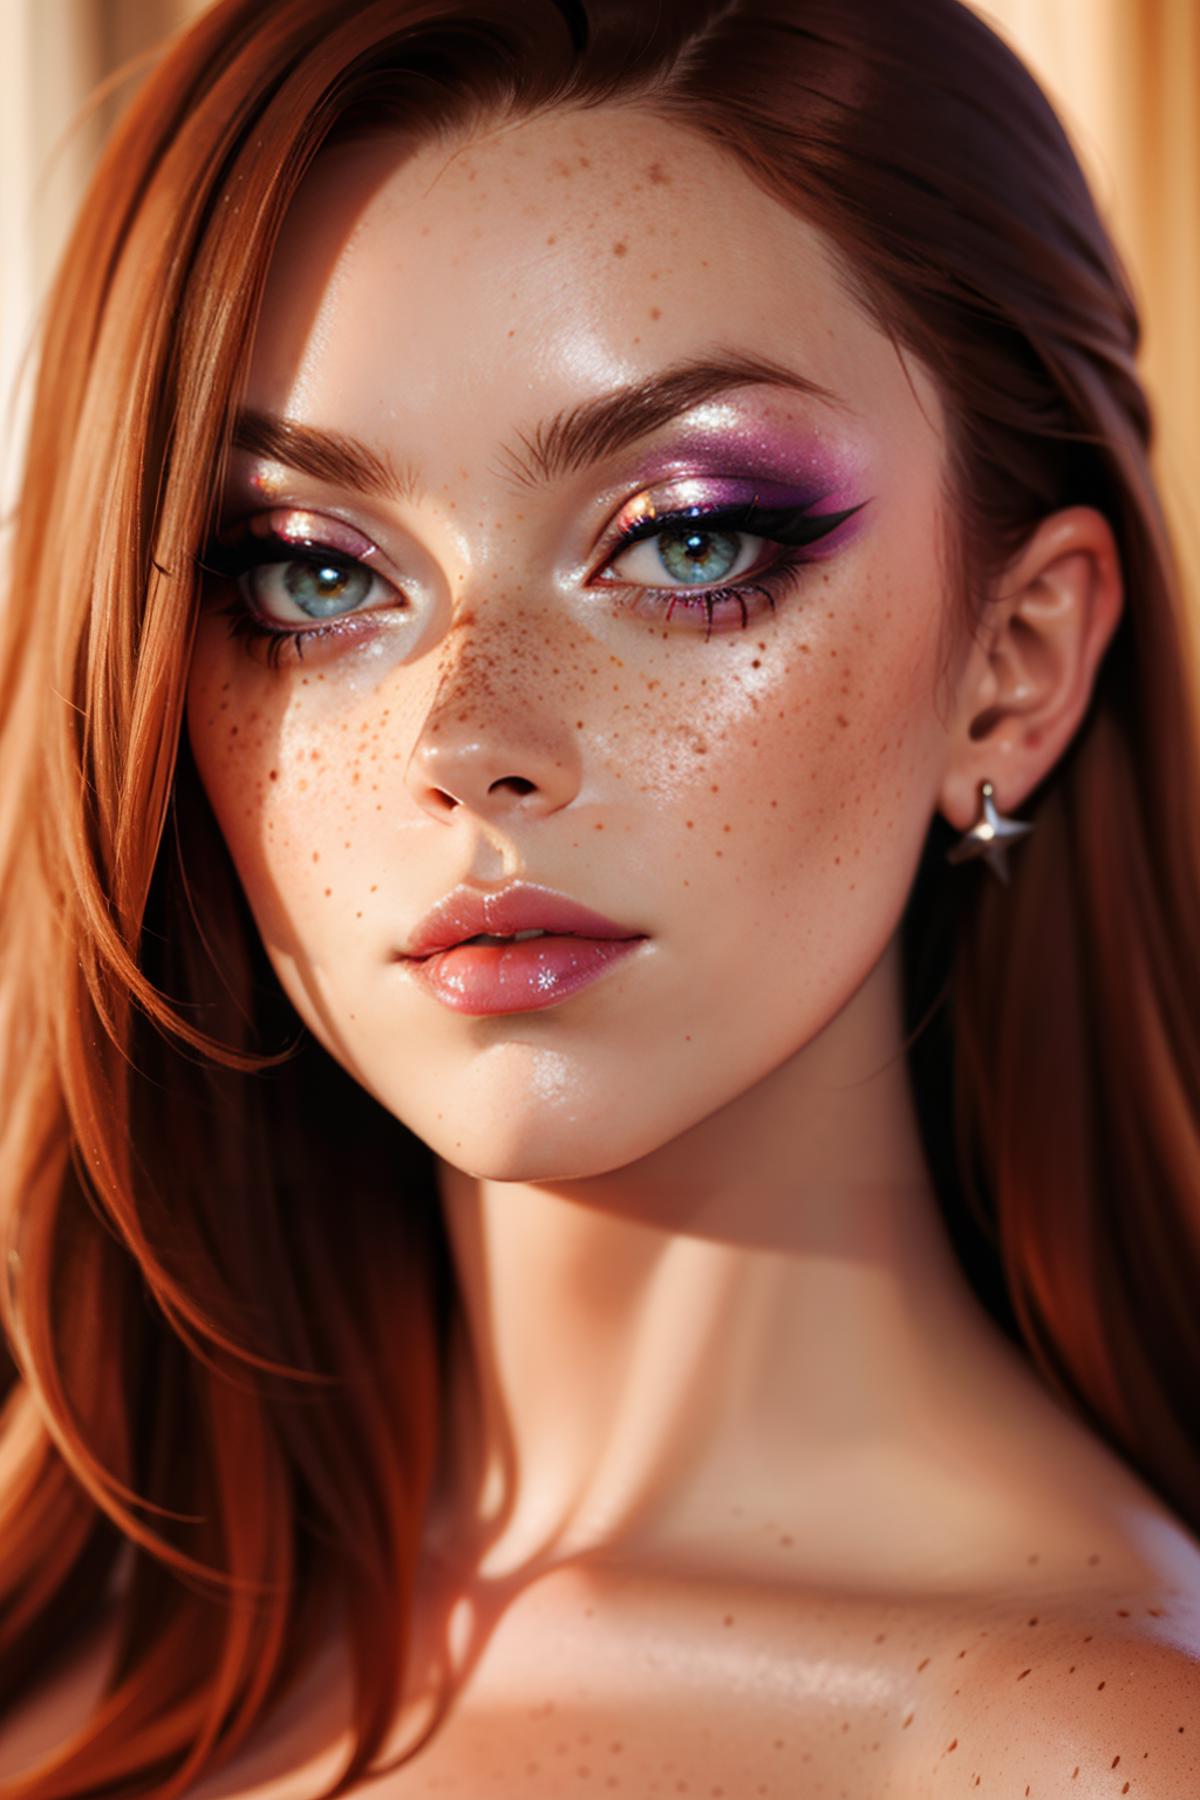 A digital painting of a woman with freckles, long hair, and blue eyes wearing heavy eye makeup and earrings.